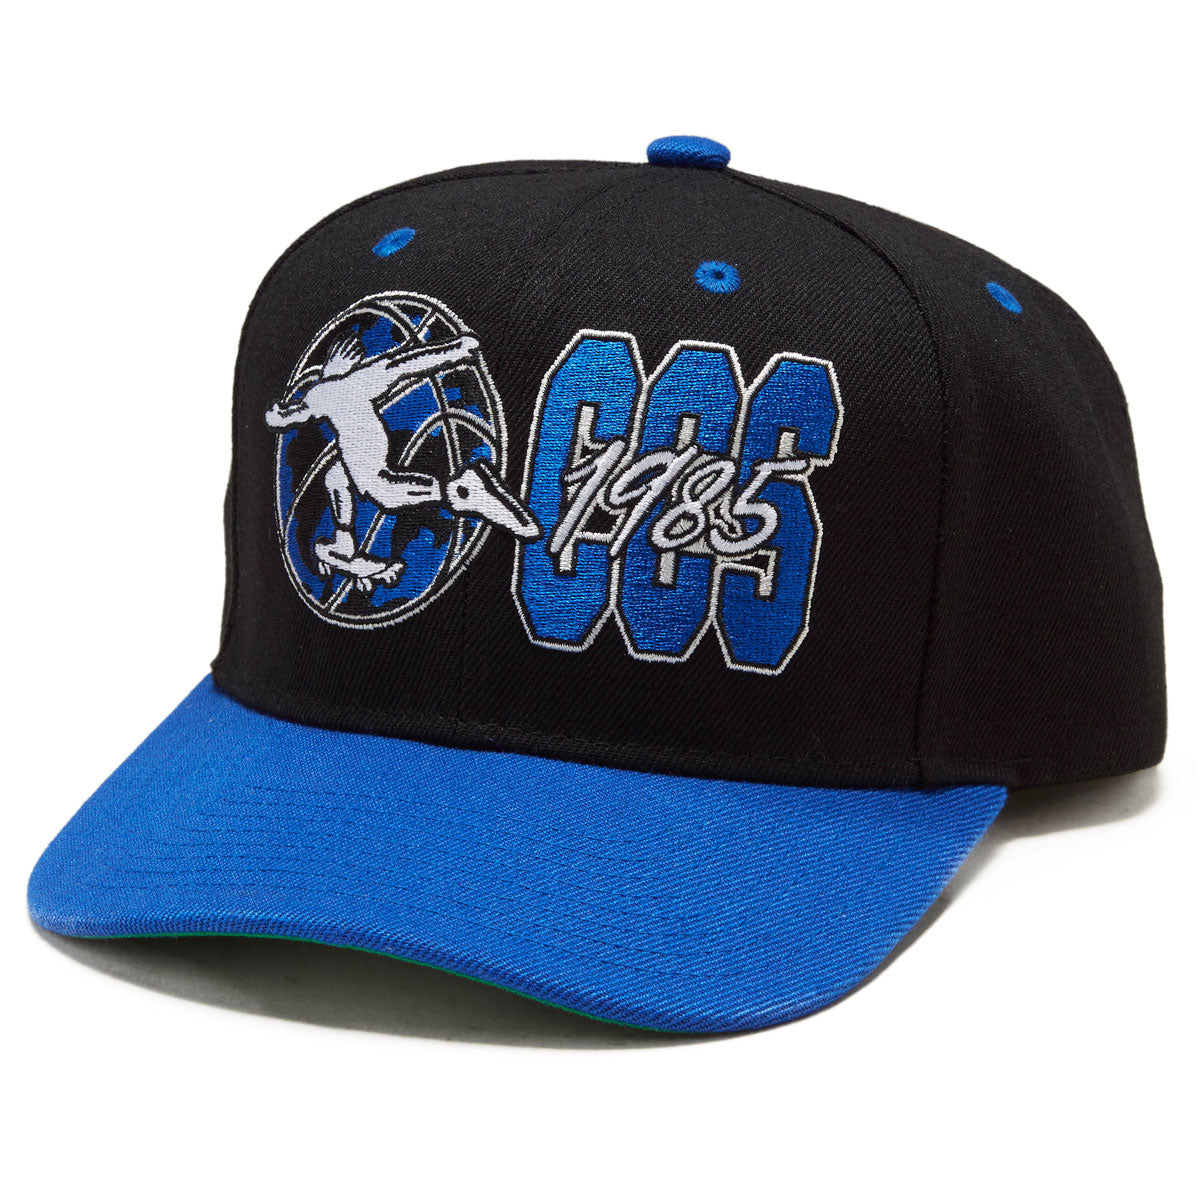 CCS x Mitchell & Ness Hoops Hat - Black/Royal image 1